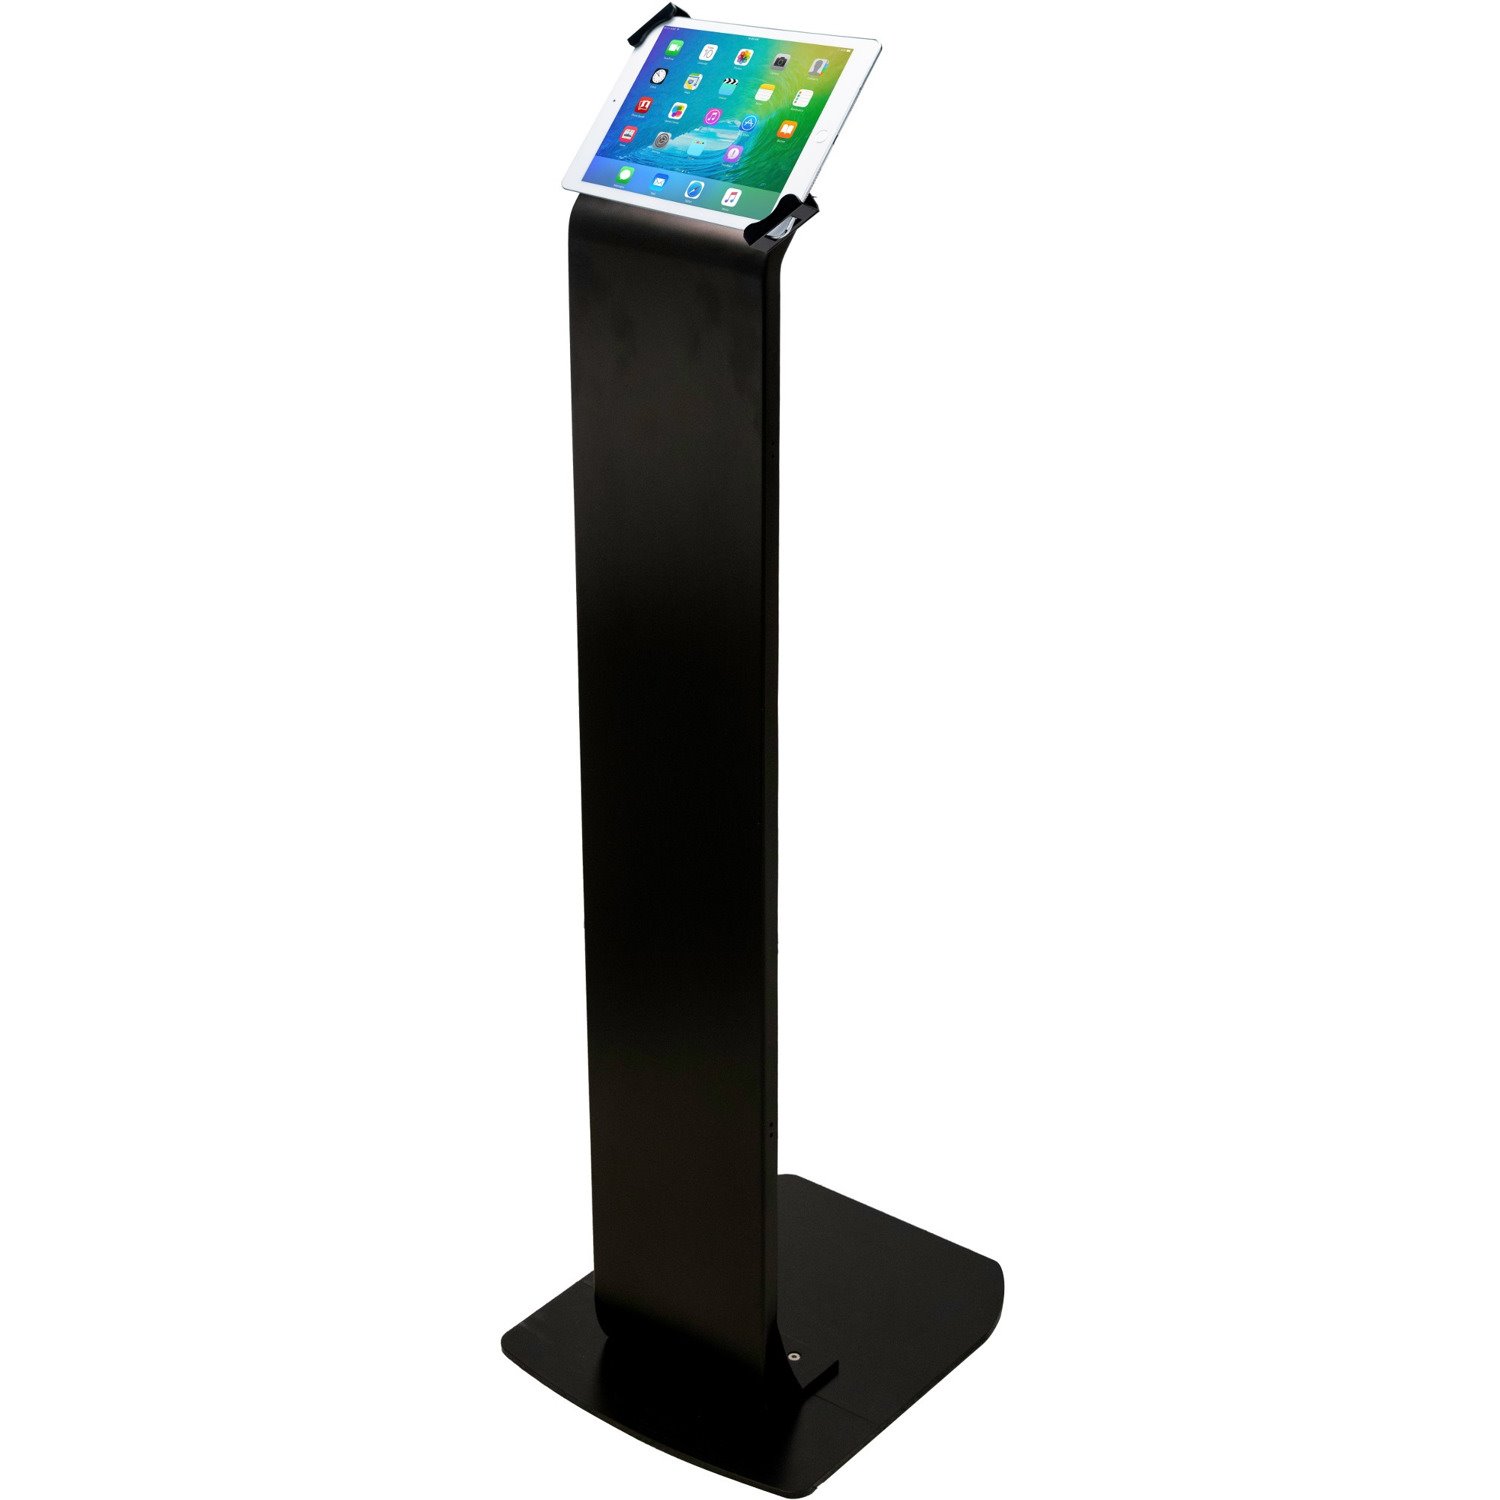 CTA Premium Locking Floor Stand Kiosk for 7-14 Inch Tablets, including iPad 10.2-inch (7th/ 8th/ 9th Generation)